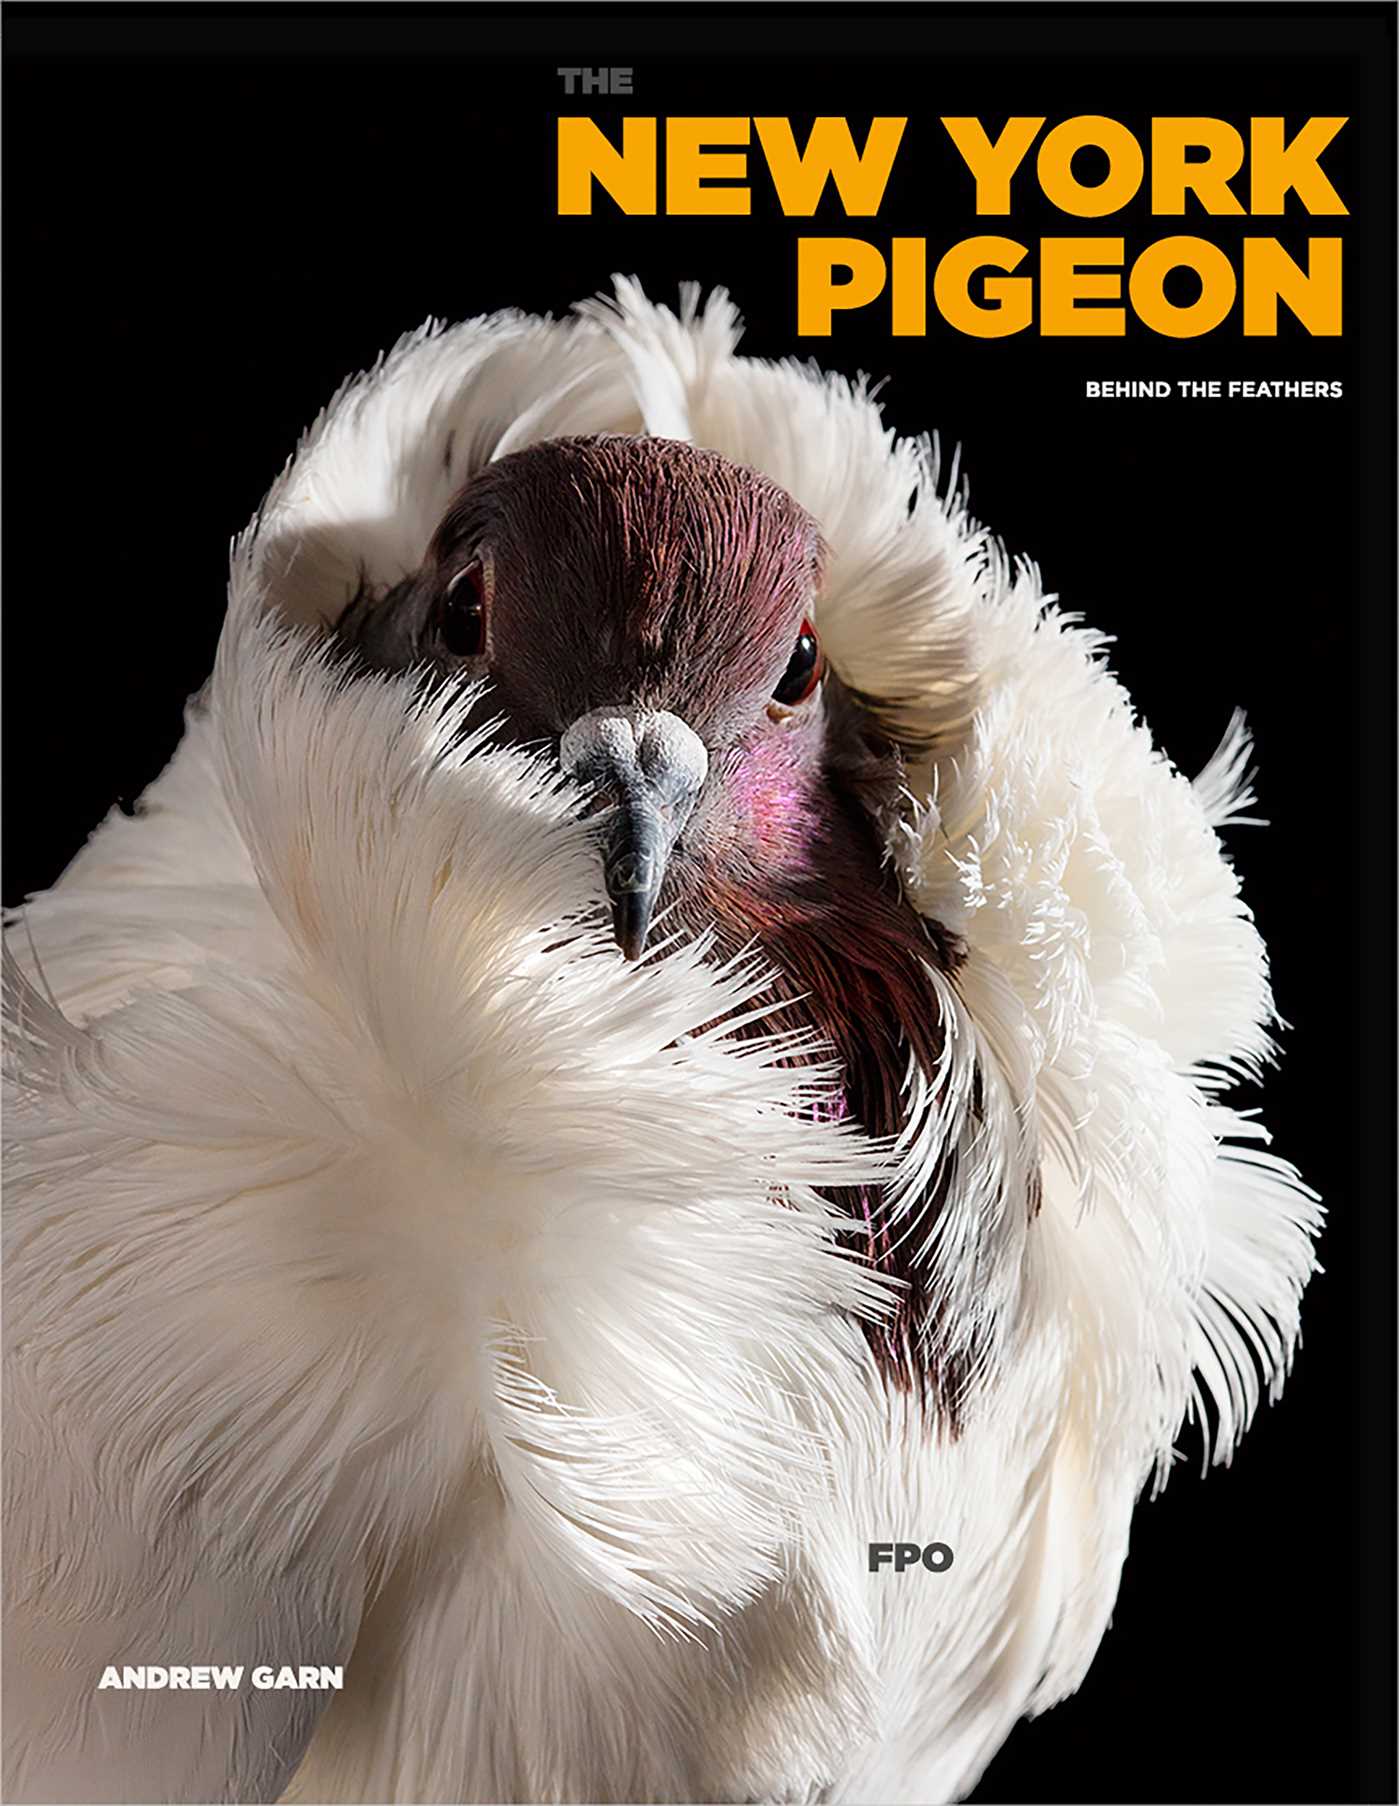 Book Launch: The New York Pigeon (2nd Ed) by Andrew Garn in convo w/ Rita MacMahon + Catherine Quayle